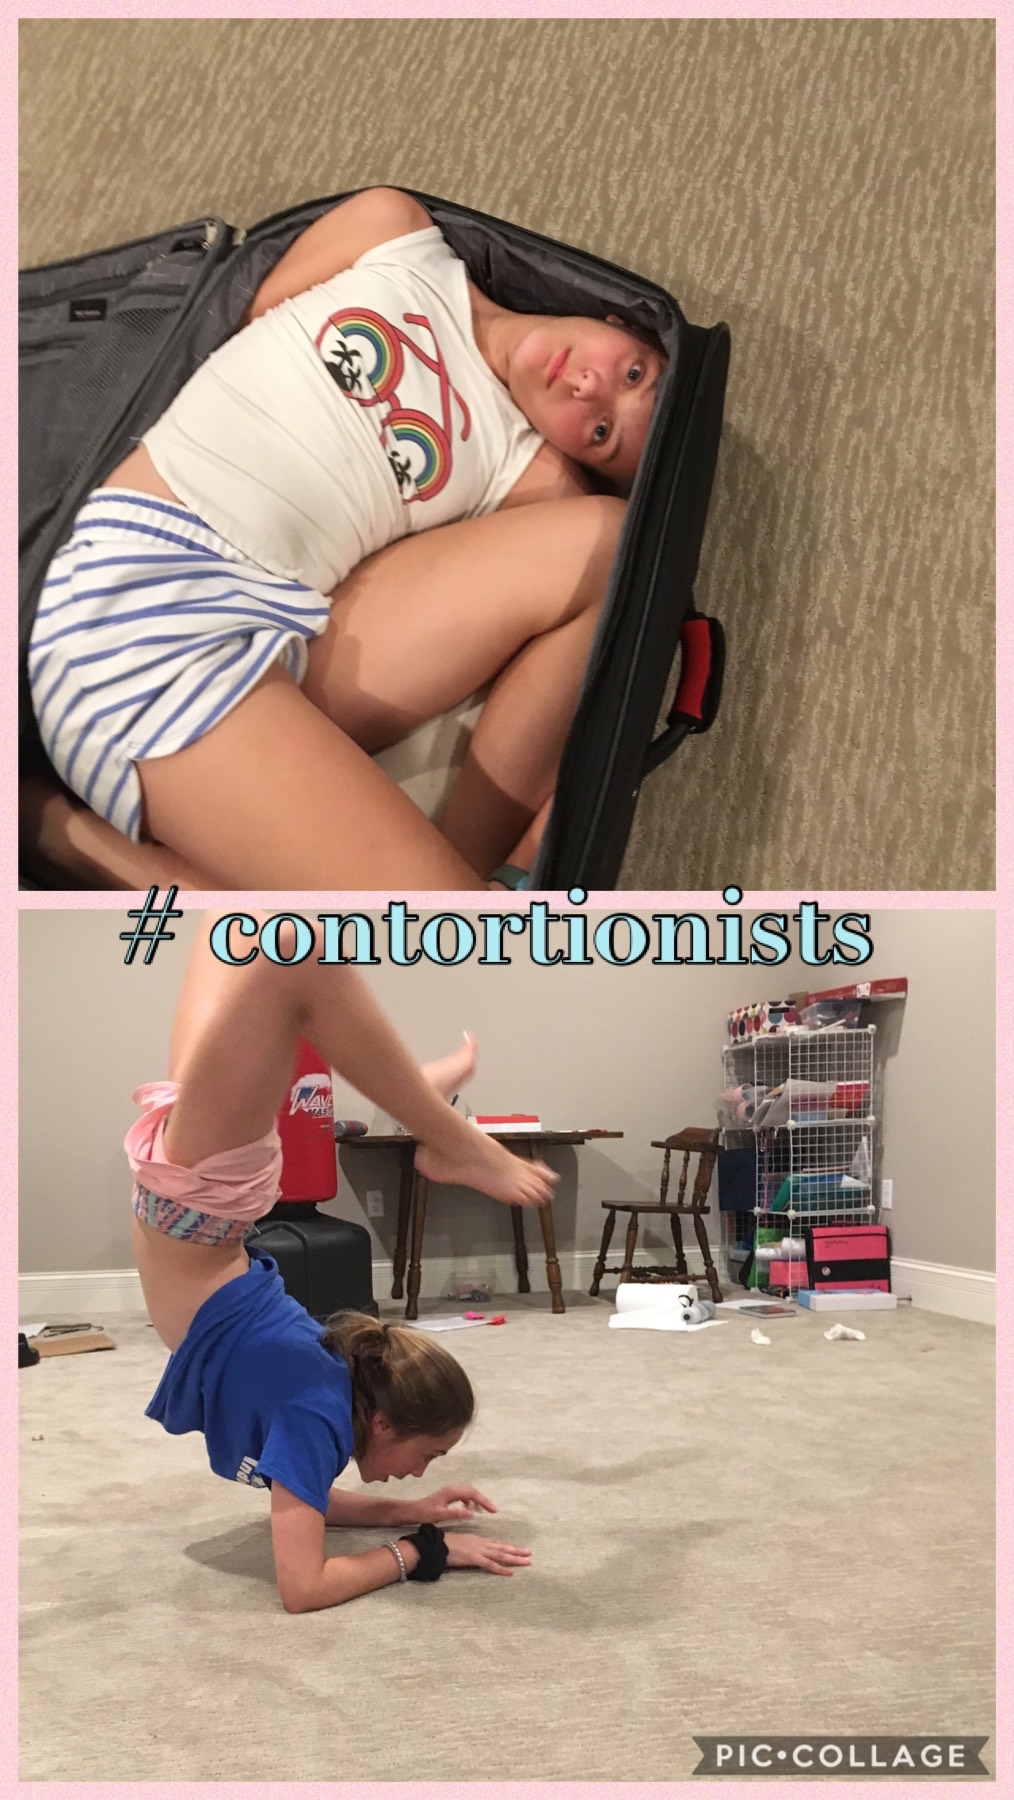 !!😄Tap 😄!!
Me and my bestie r having a sleepover and we decided to this WE R NOW CONTORTIONISTS!!!! Yaaaa follow us at sriney and boujicarl luv u all hope u think this is cool